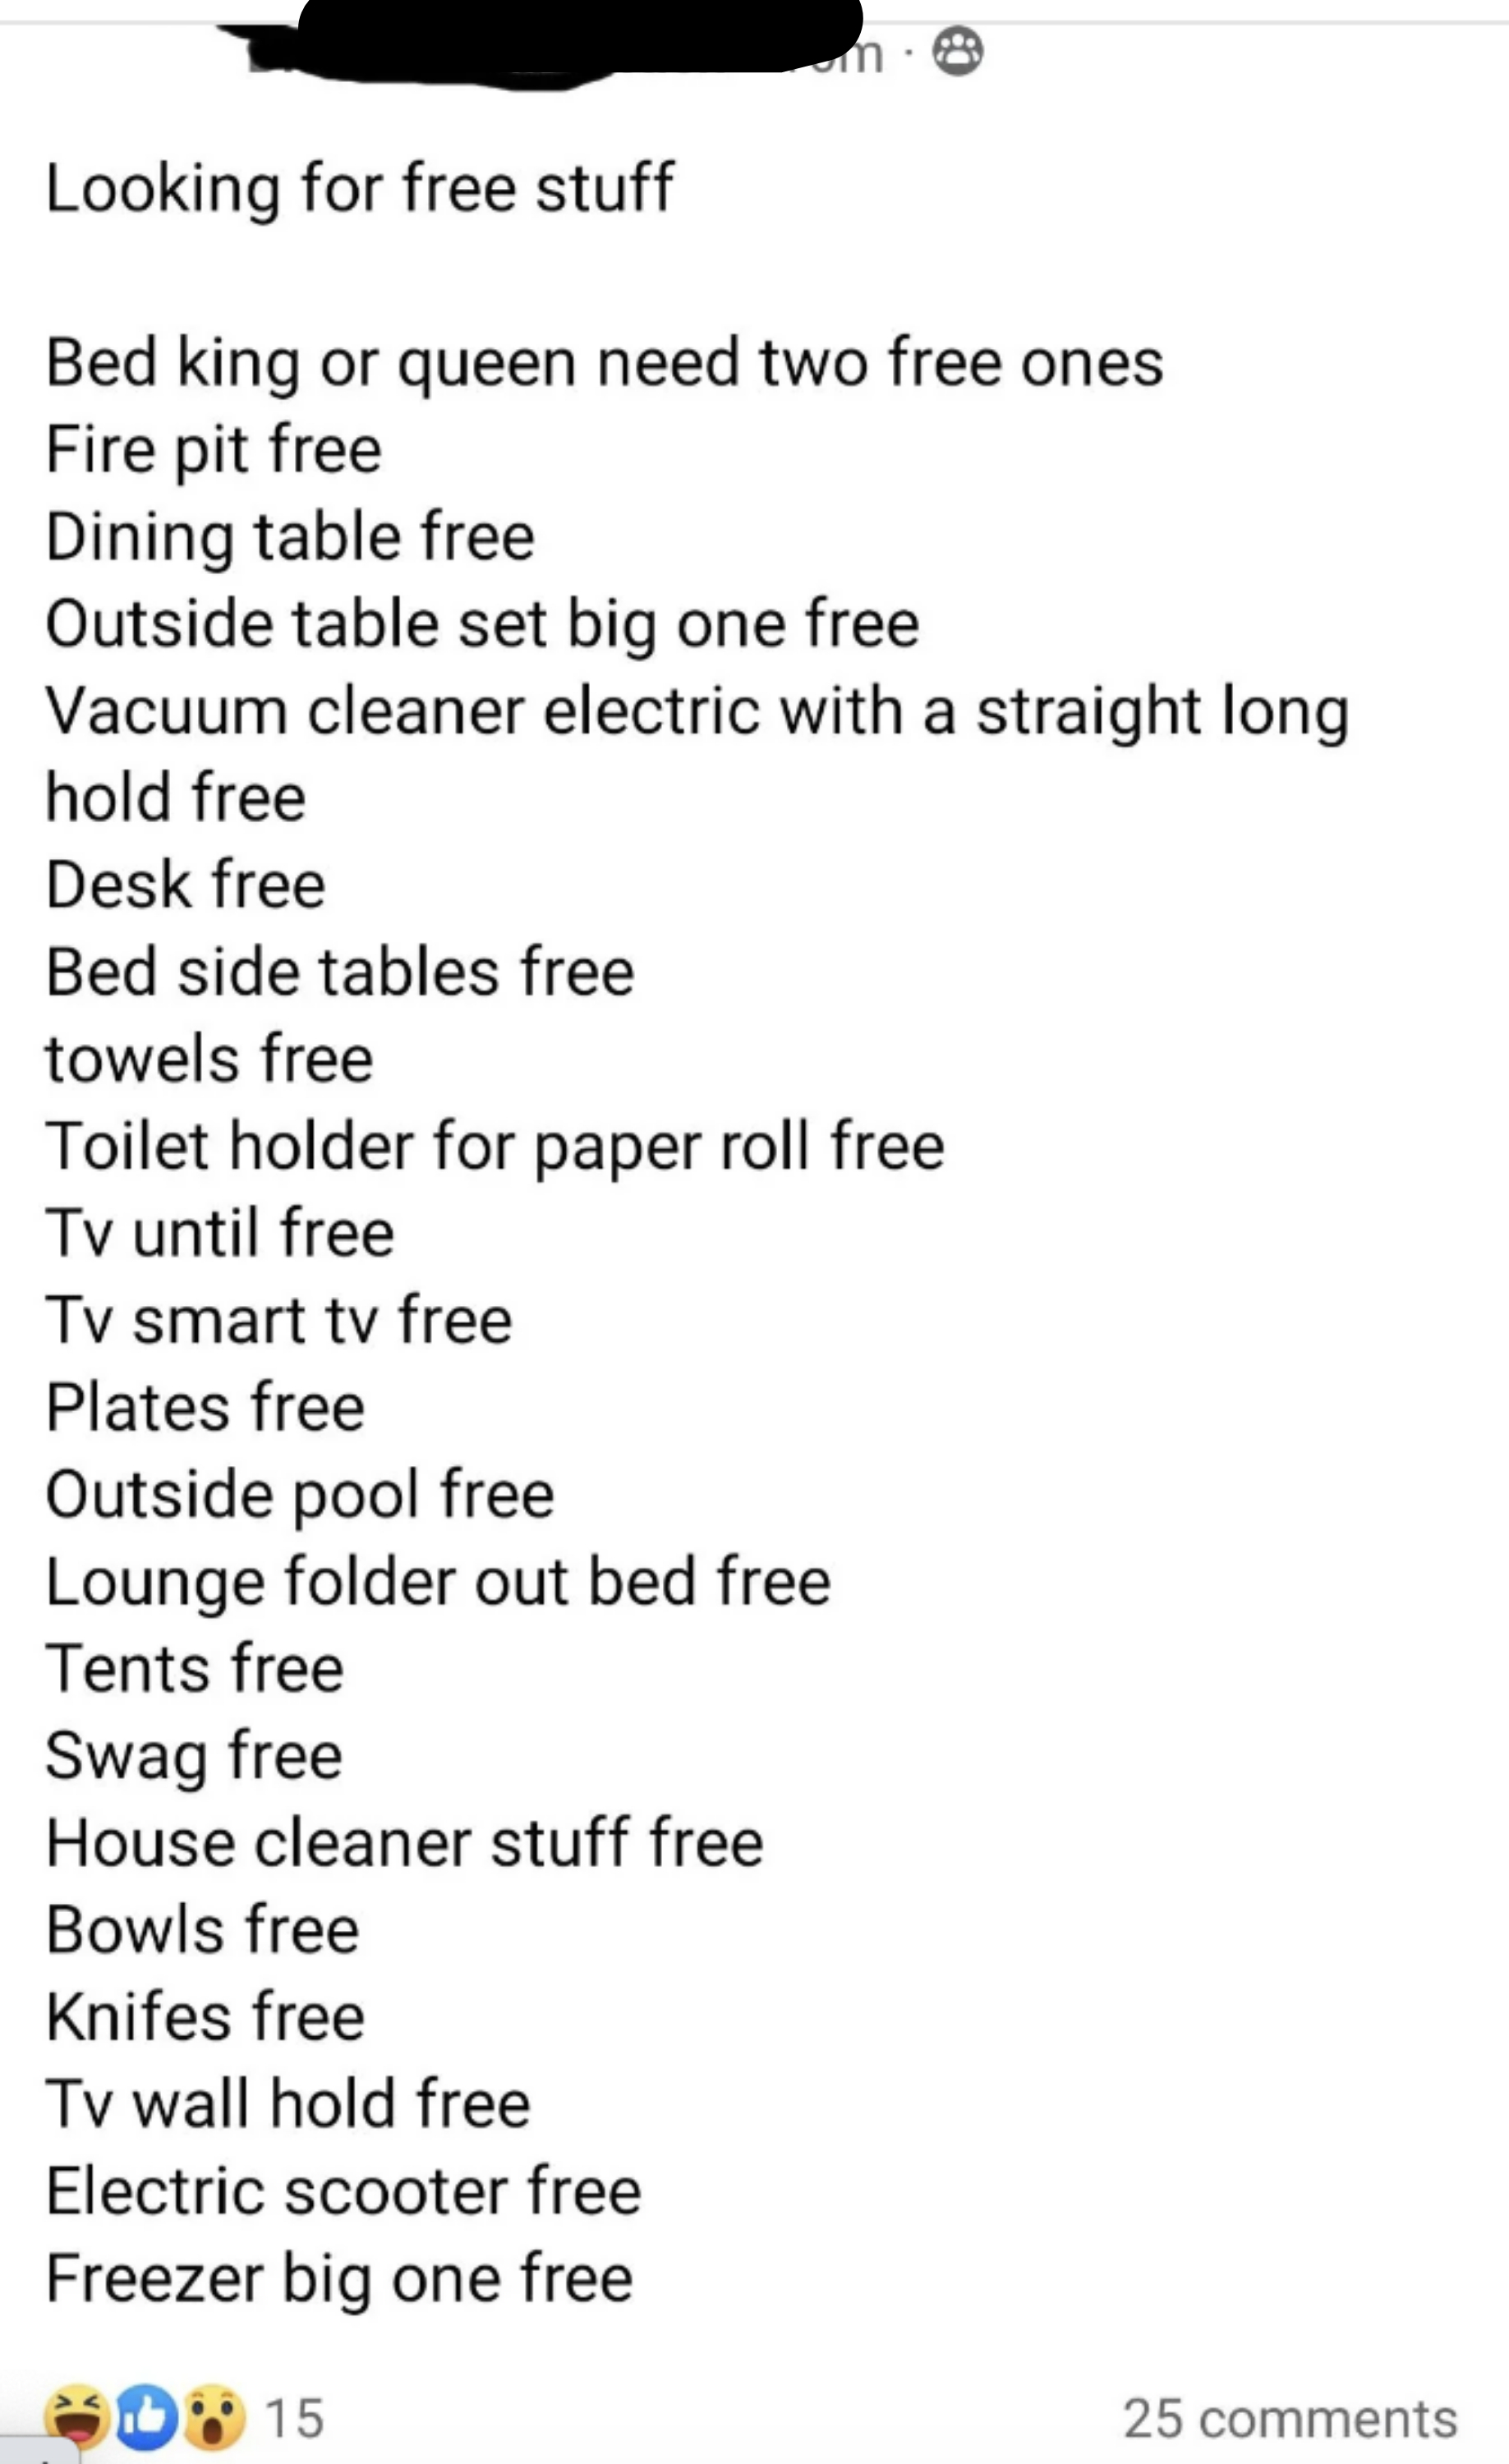 &quot;Looking for free stuff&quot;